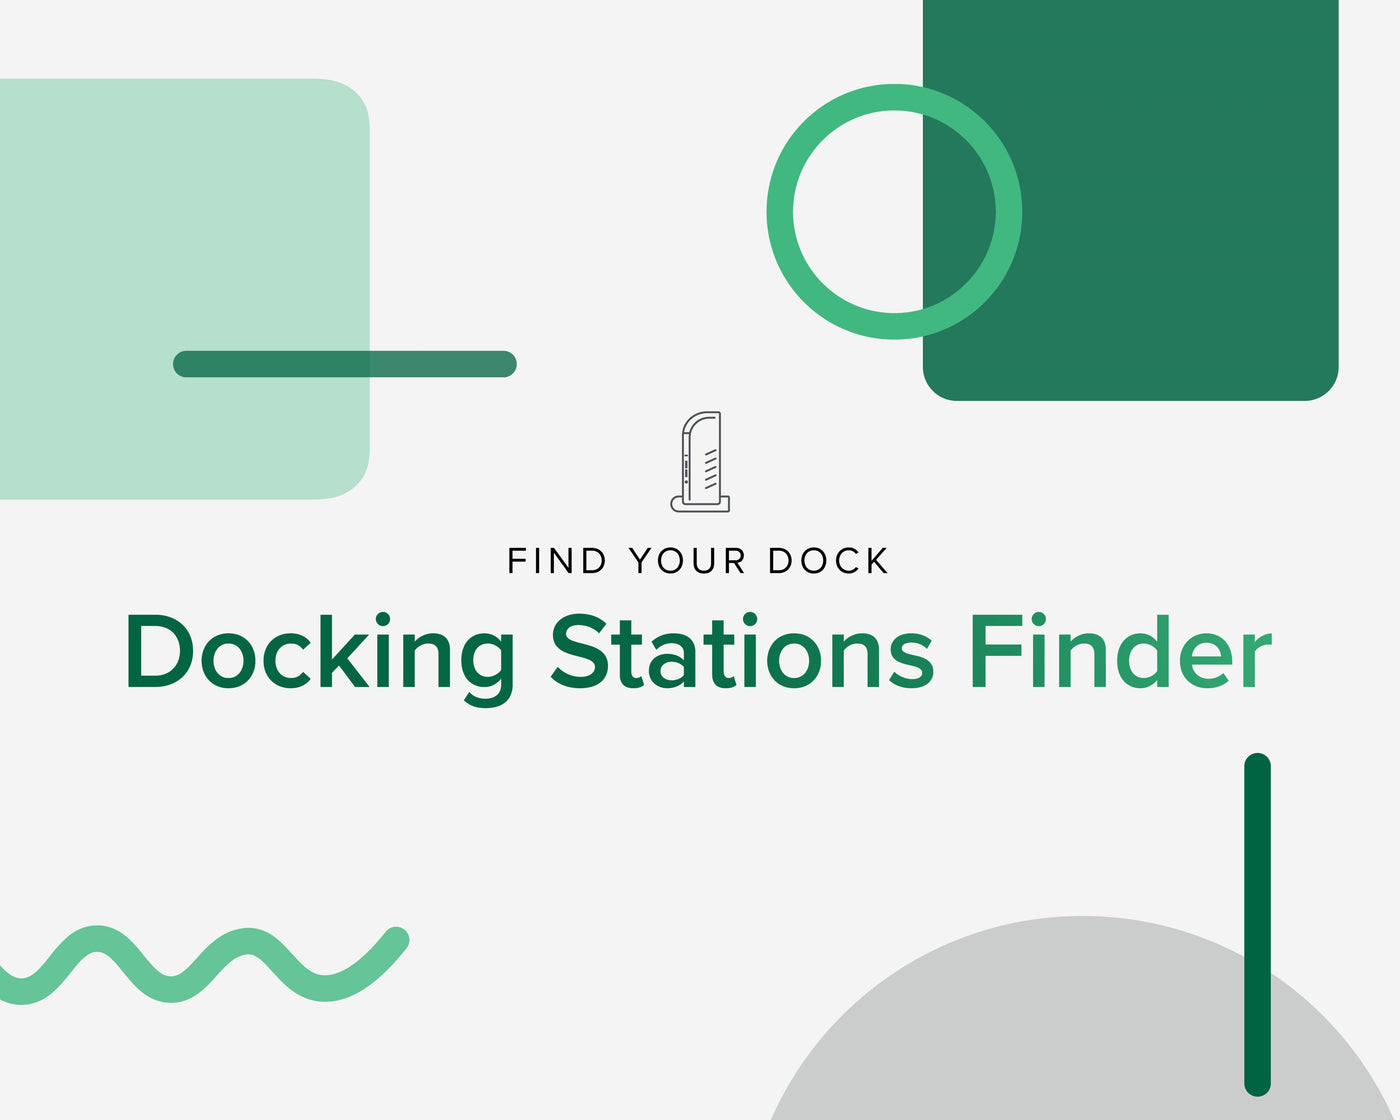 Find your dock with the docking station finder